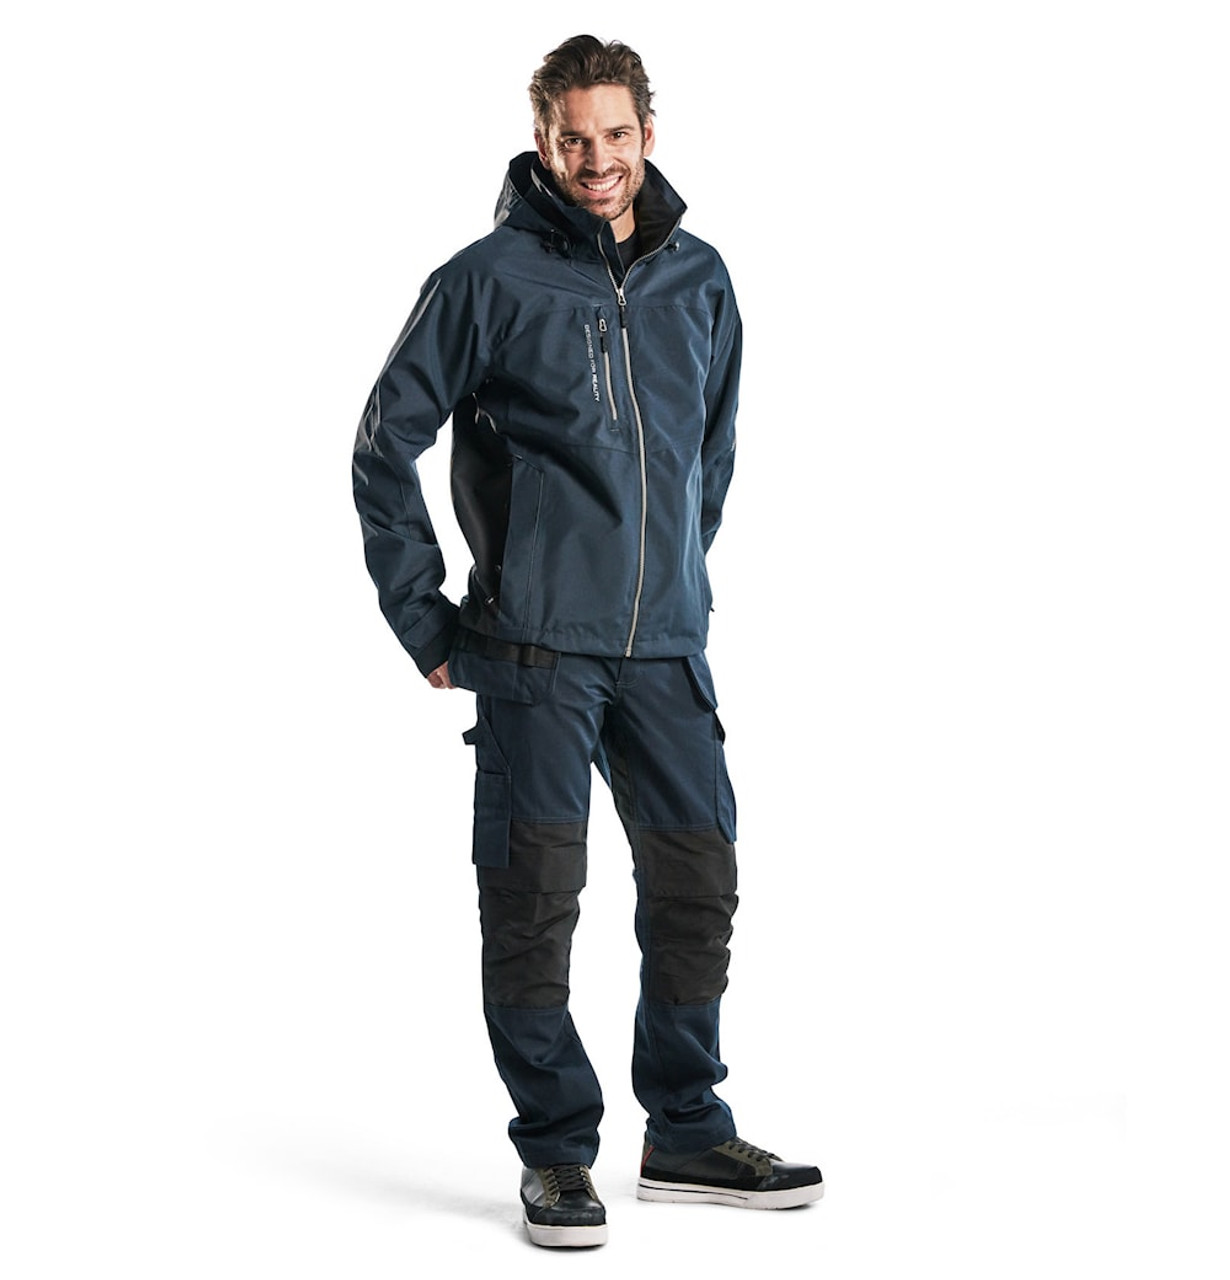 Buy online in Australia and New Zealand a Mens Dark Navy Blue Jacket  for Carpenters that are comfortable and durable.